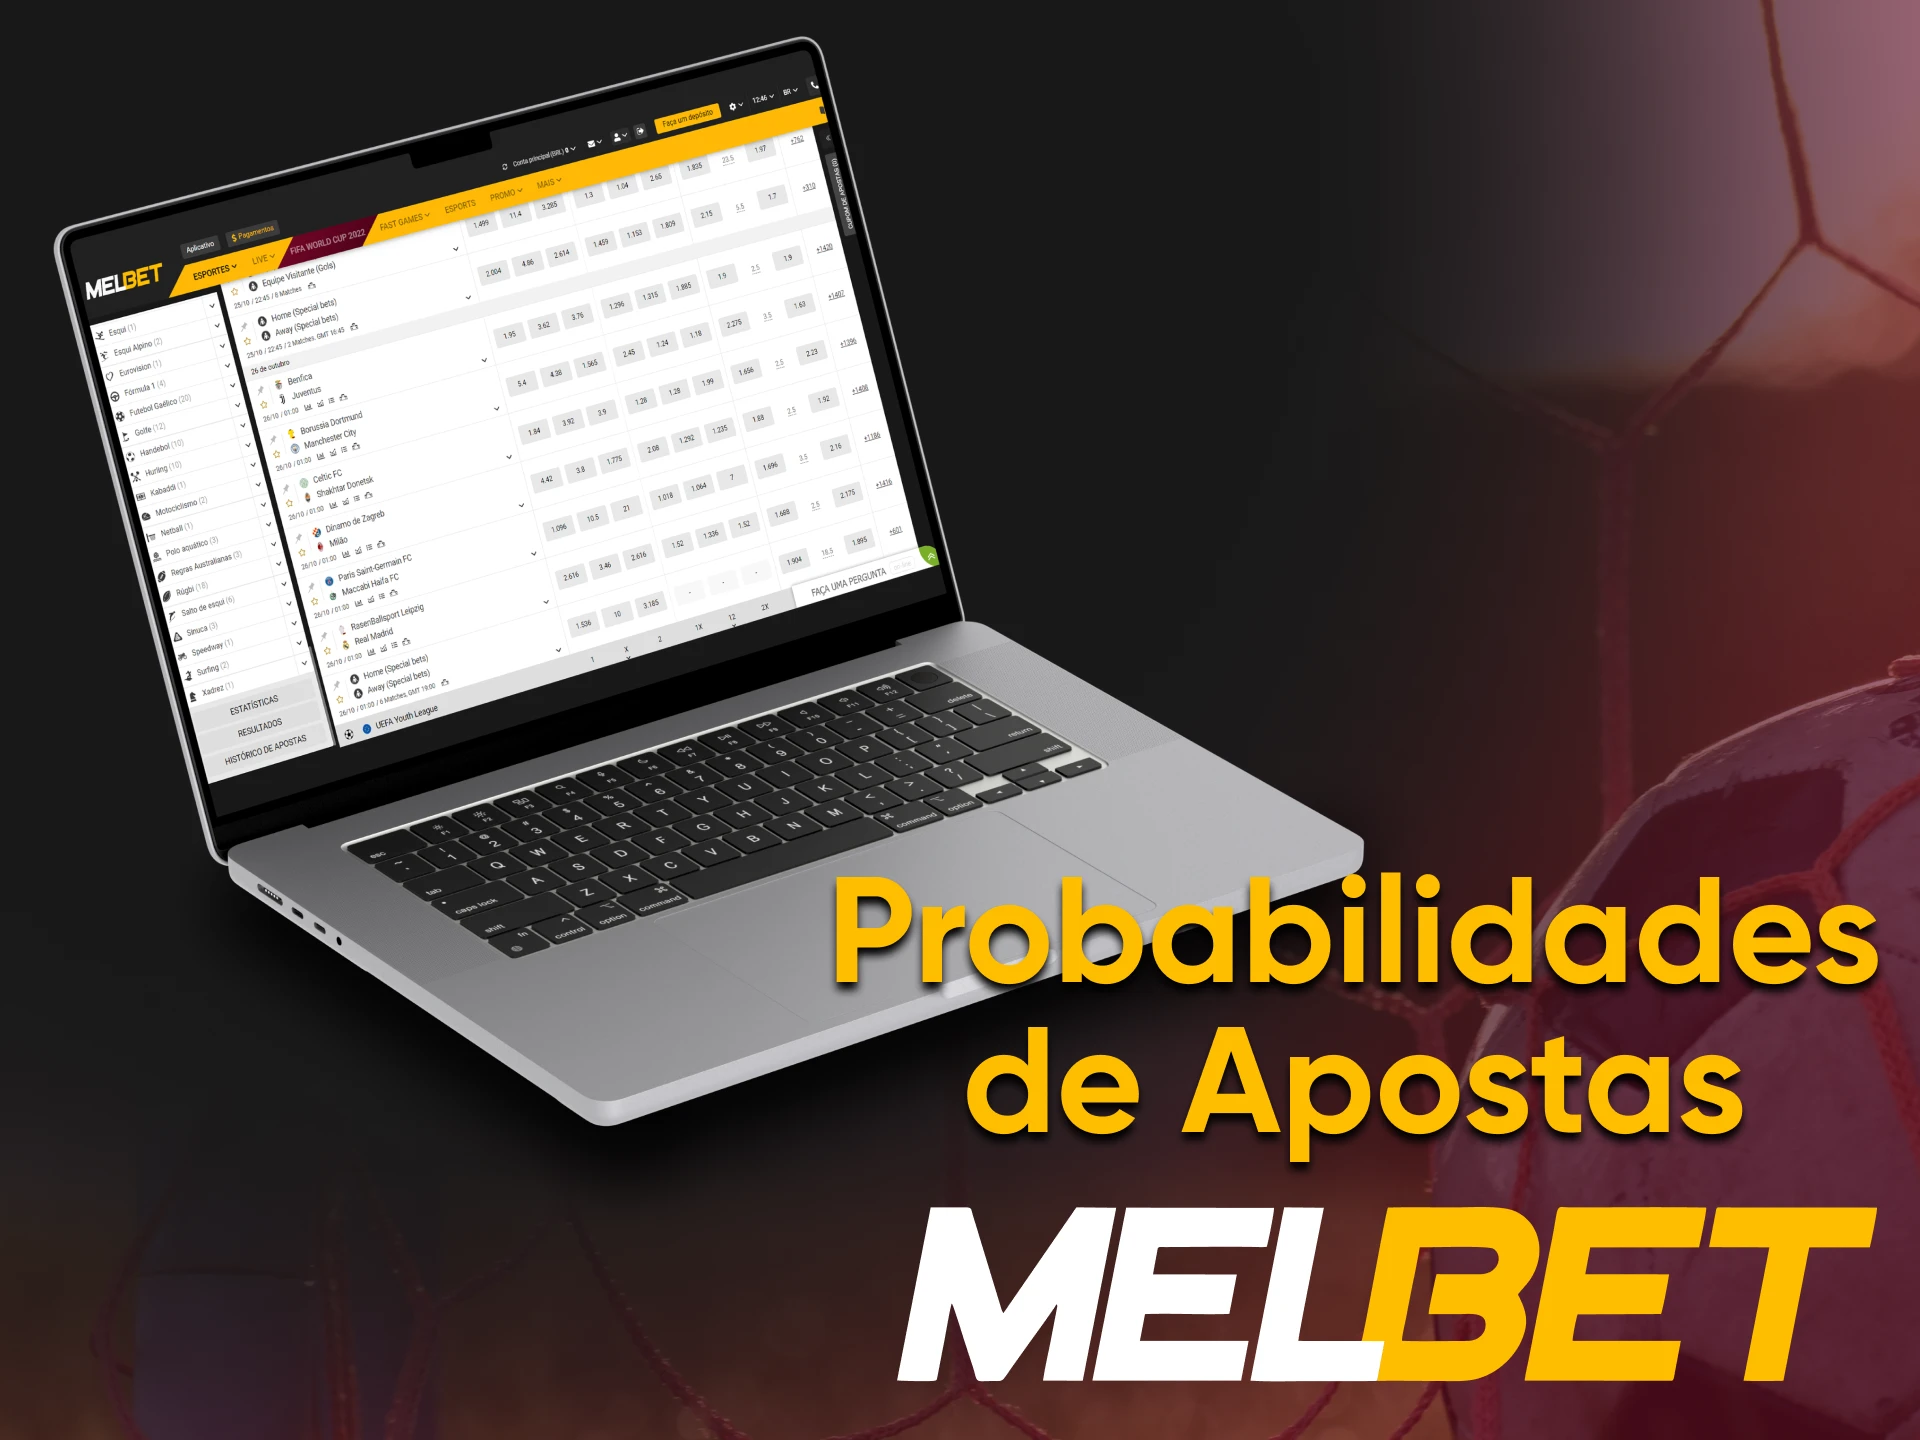 At Melbet, you can always place bets with the highest odds.